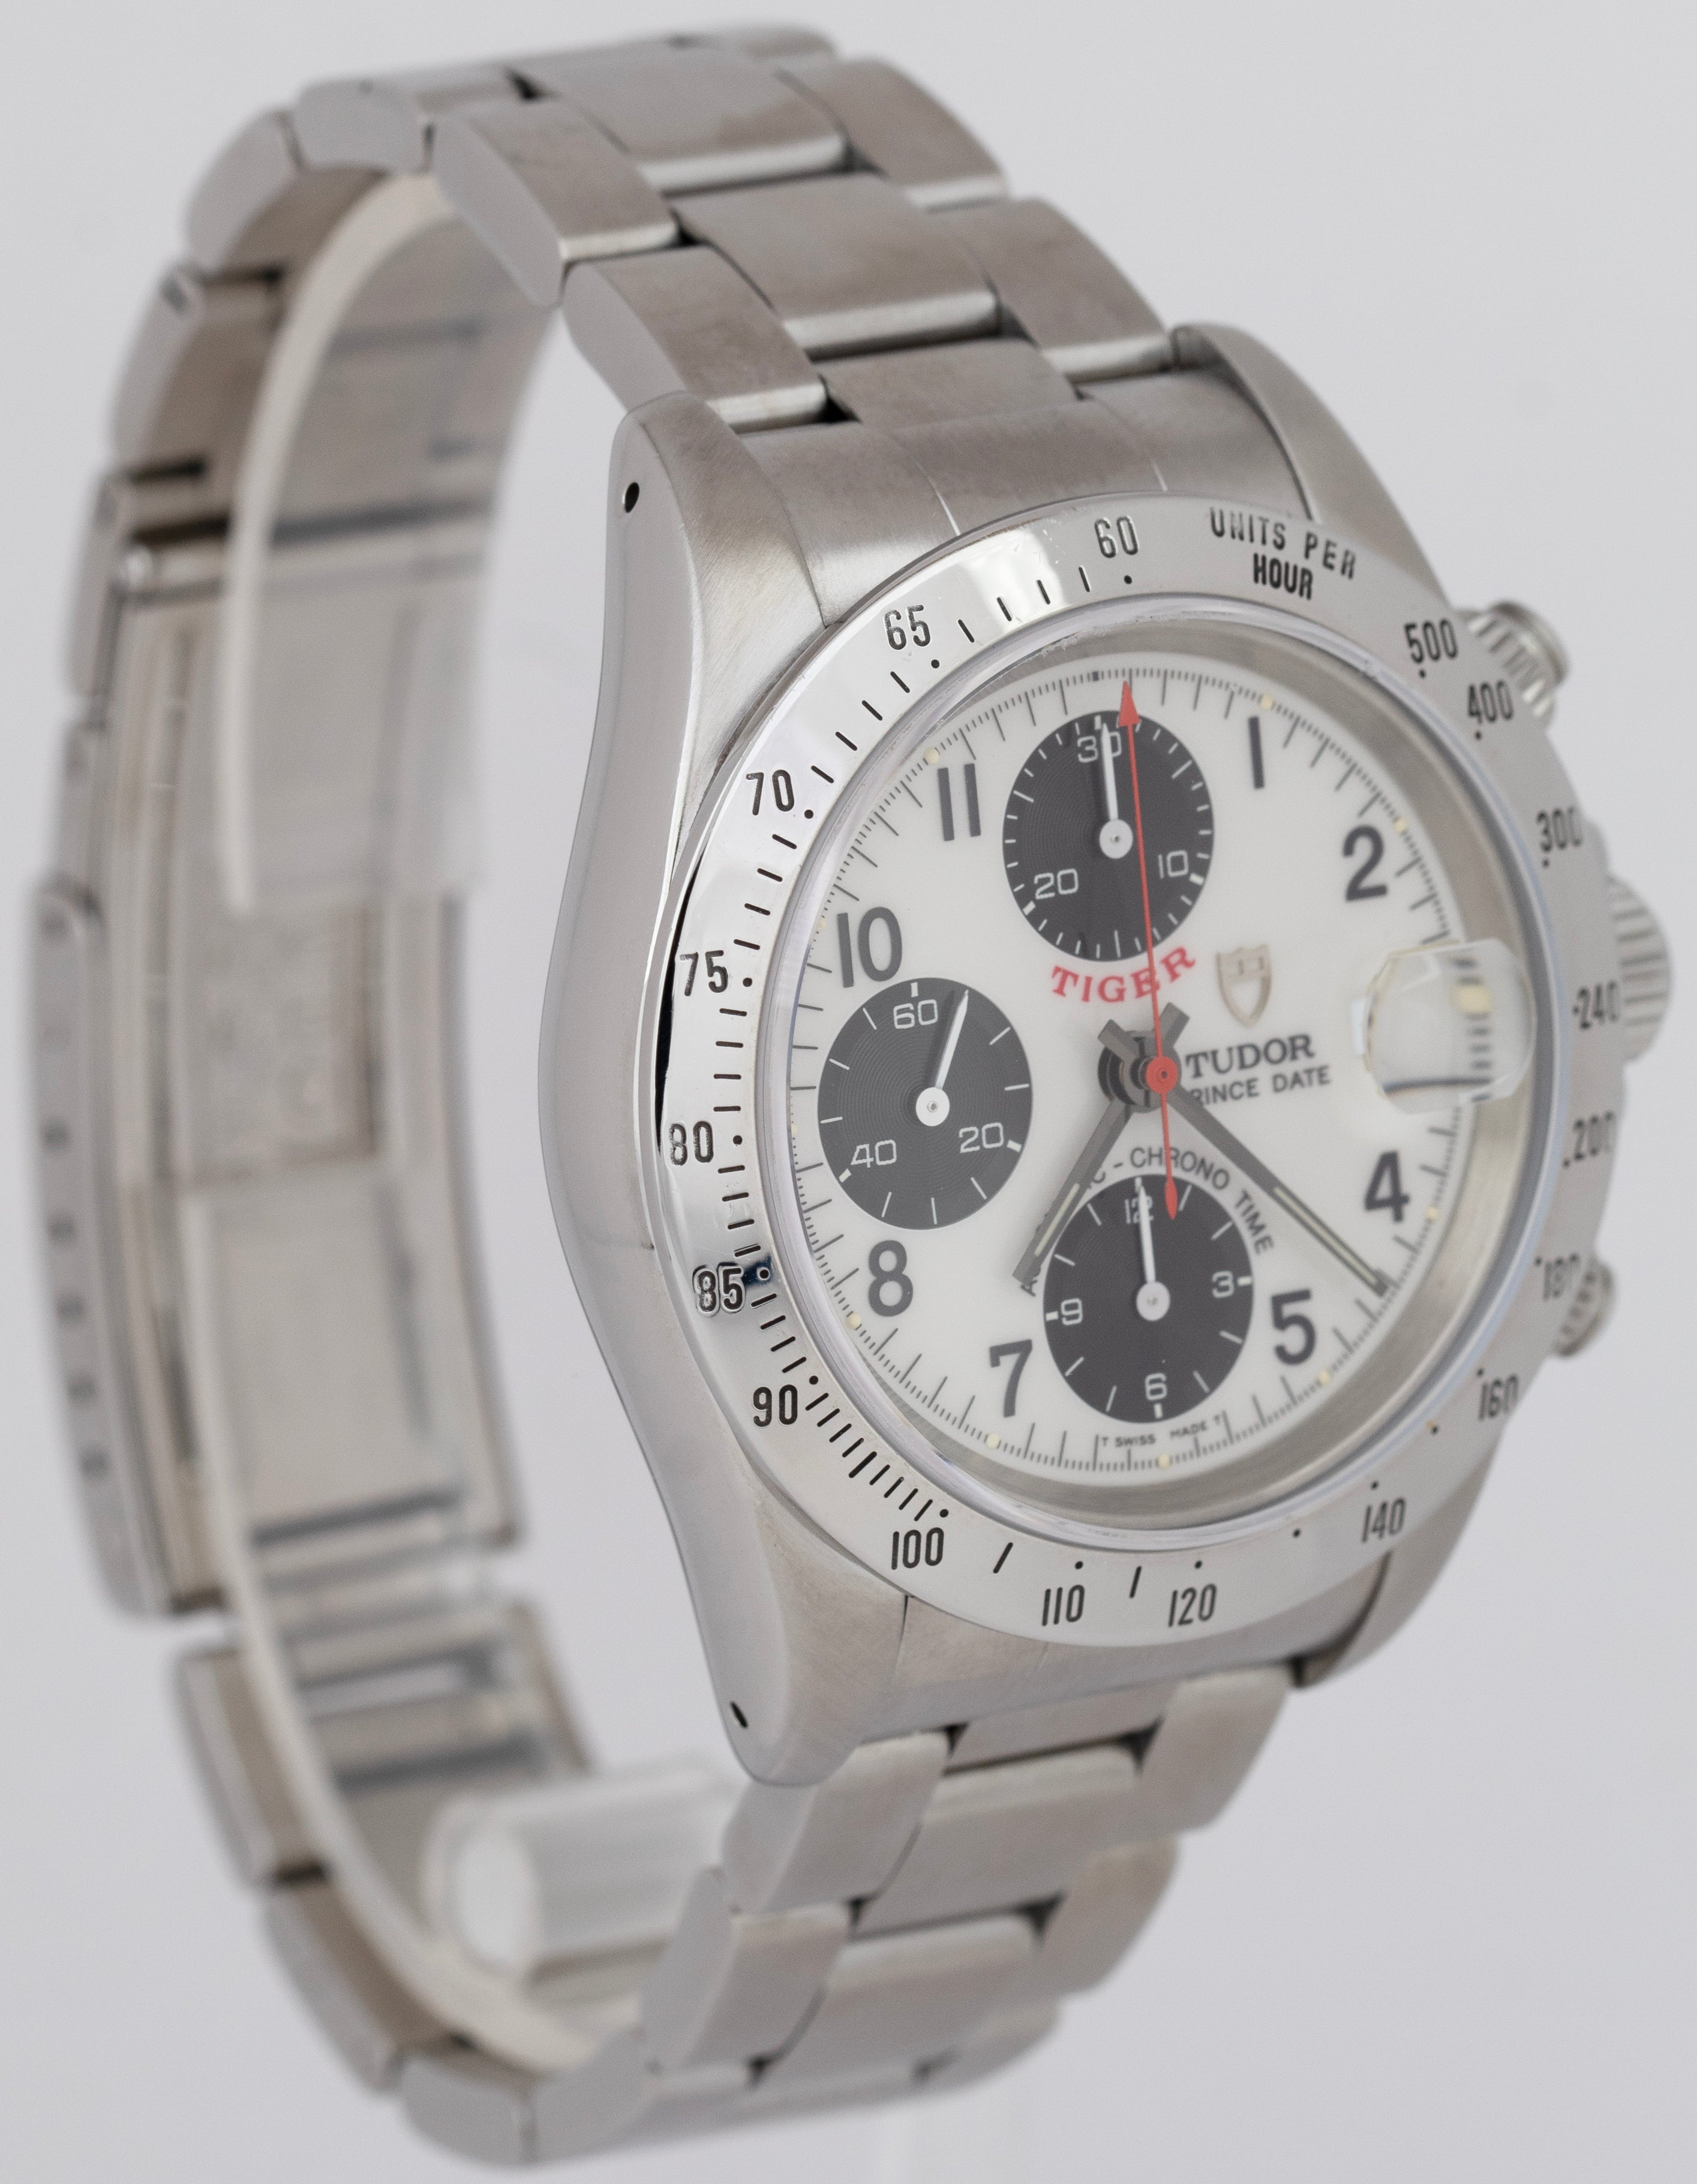 Tudor Prince Date Chronograph Tiger Silver 79280 P 40mm Stainless Steel Watch